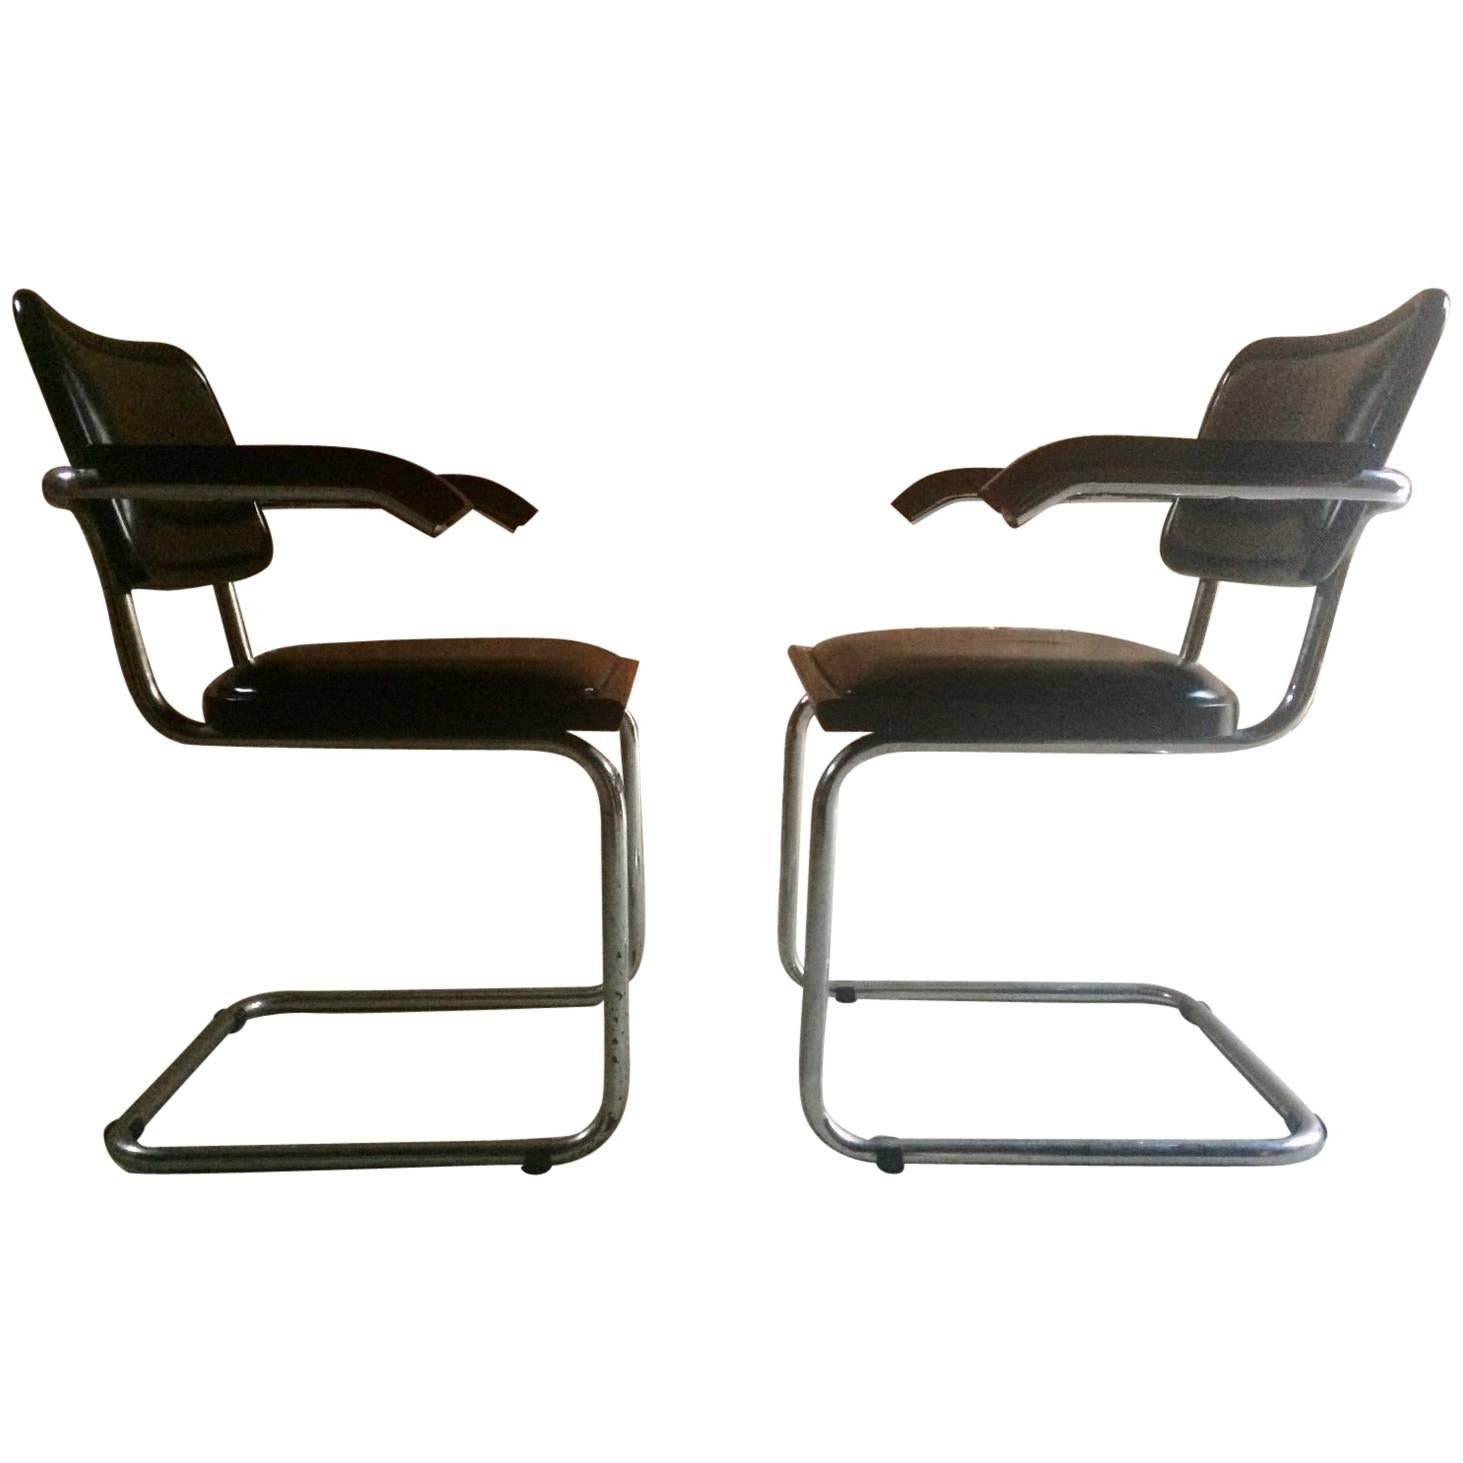 Pair of Mart Stam Design Cantilever Chairs, 1960s Original Leather and Chrome